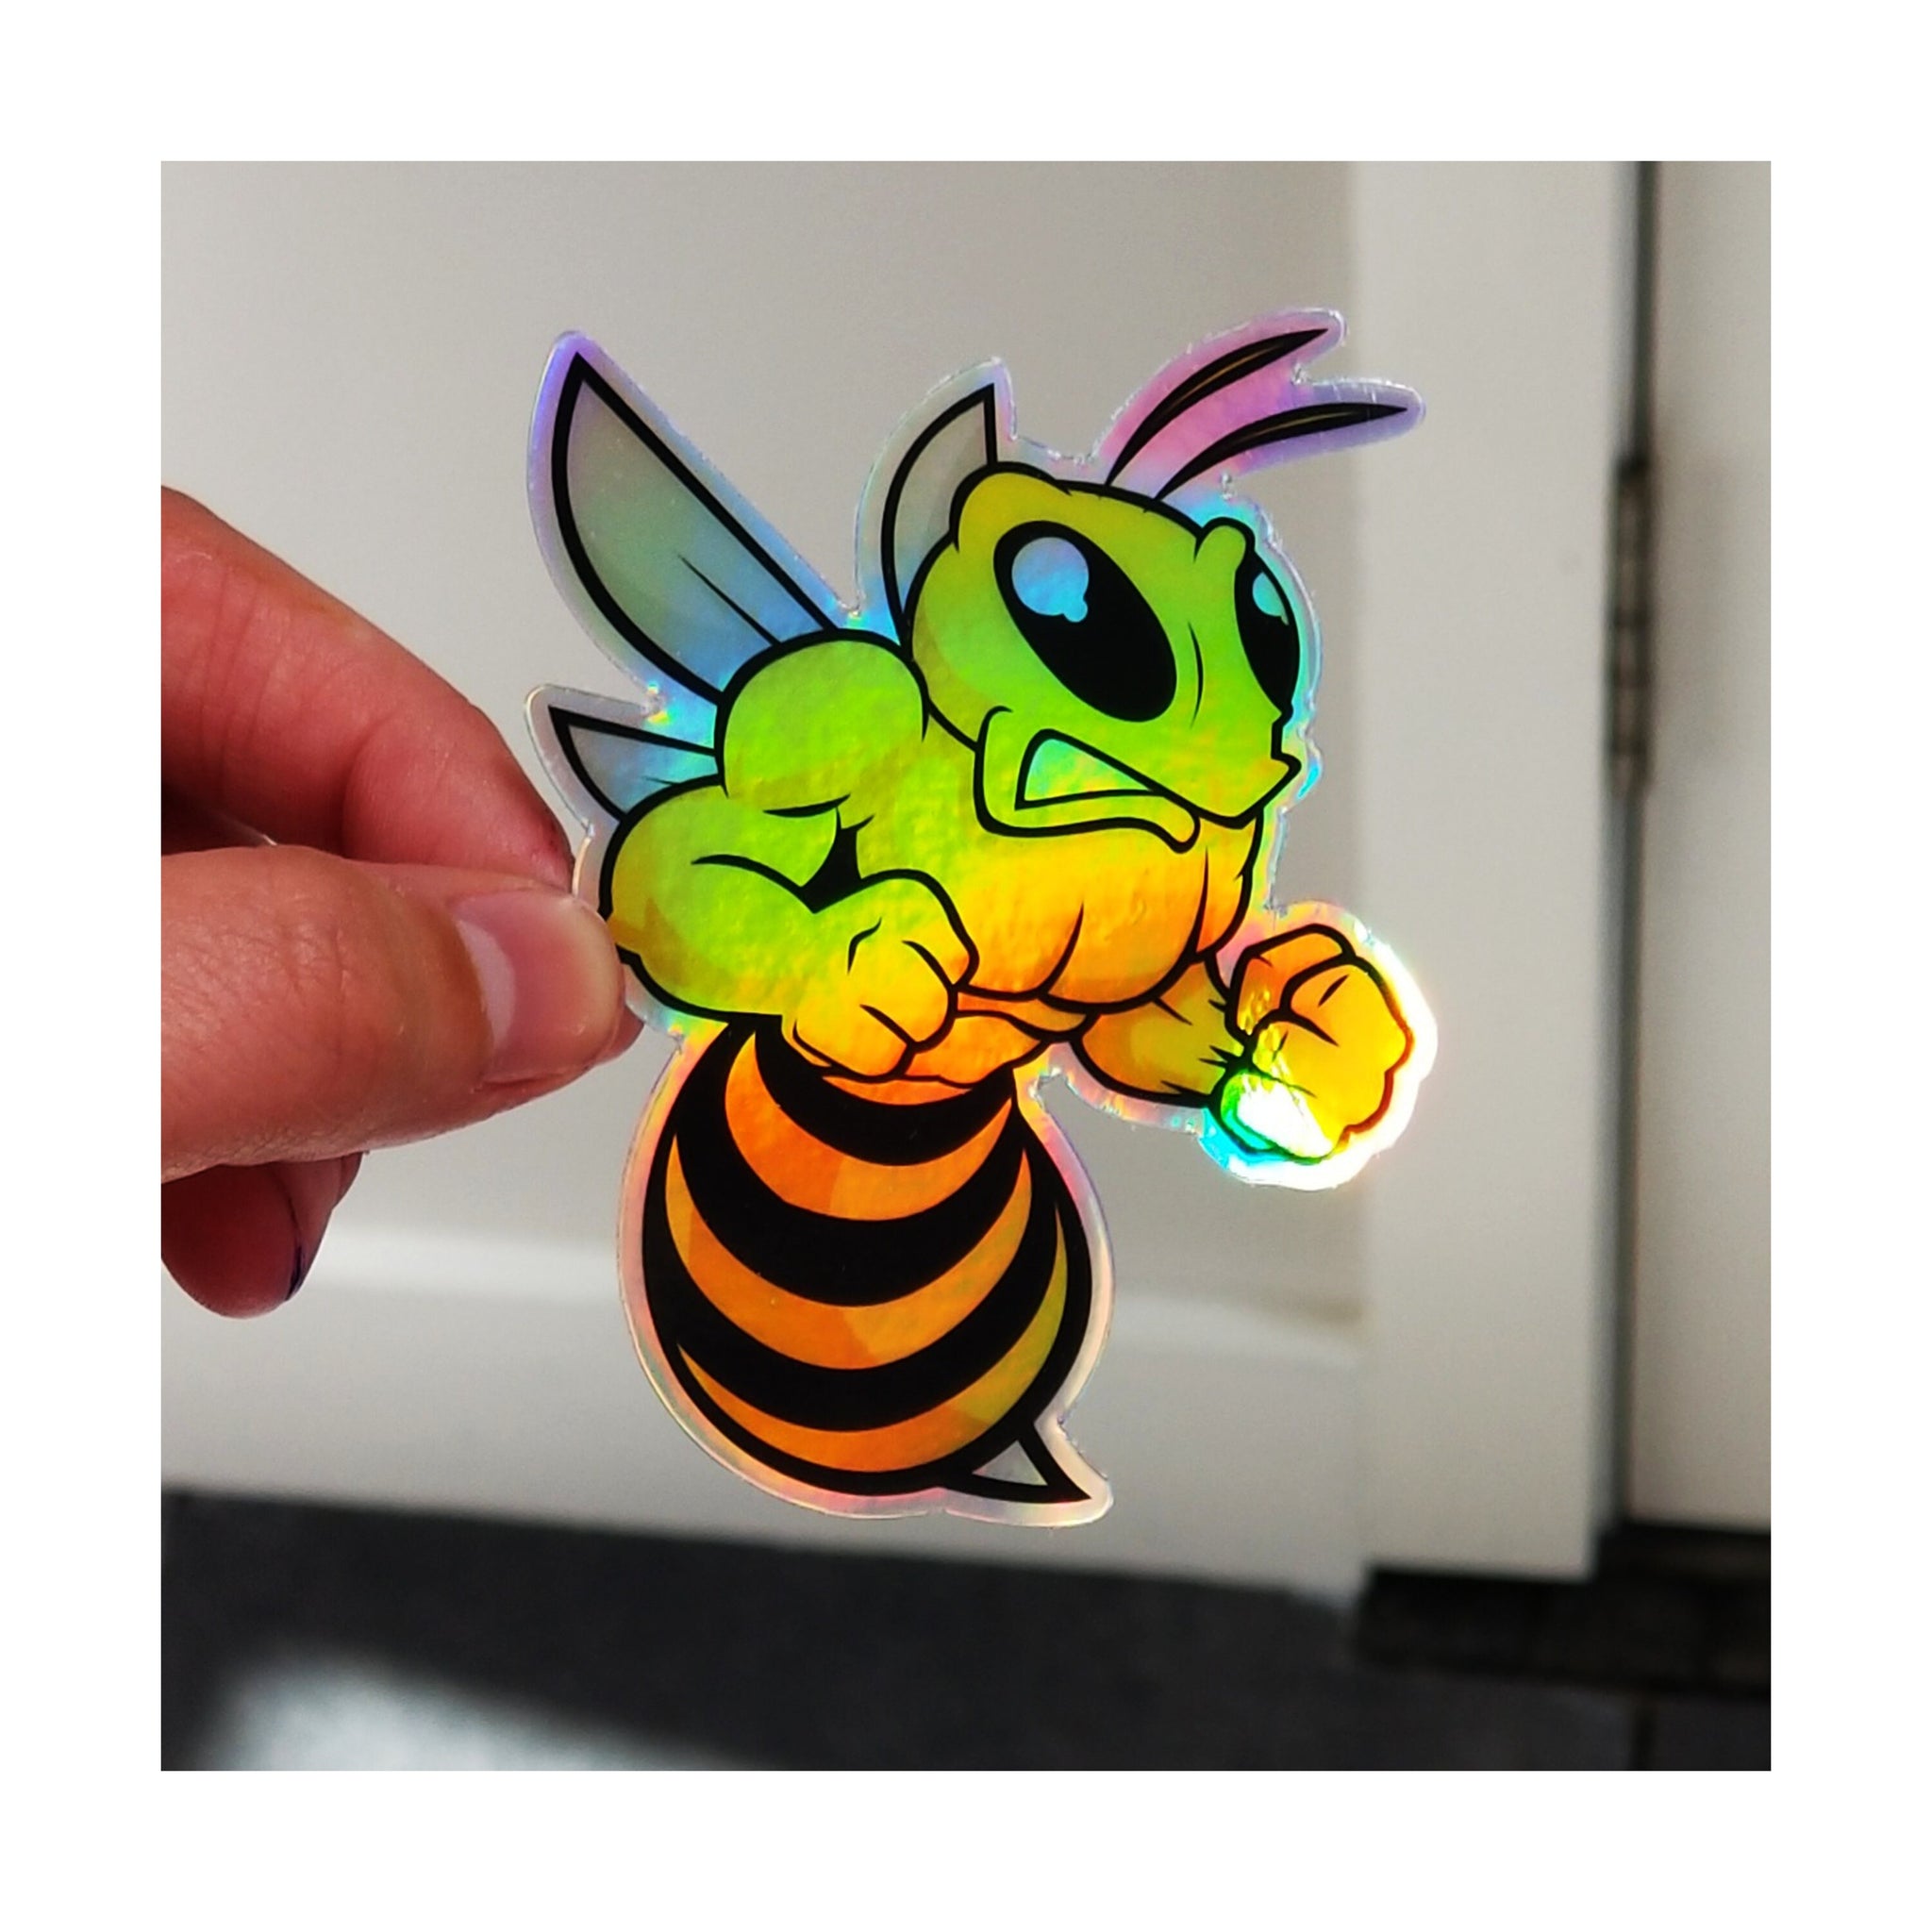 Angry Bee Sticker Holographic Sticker Hologram Decal Hornet Yellow Jacket 3.25"